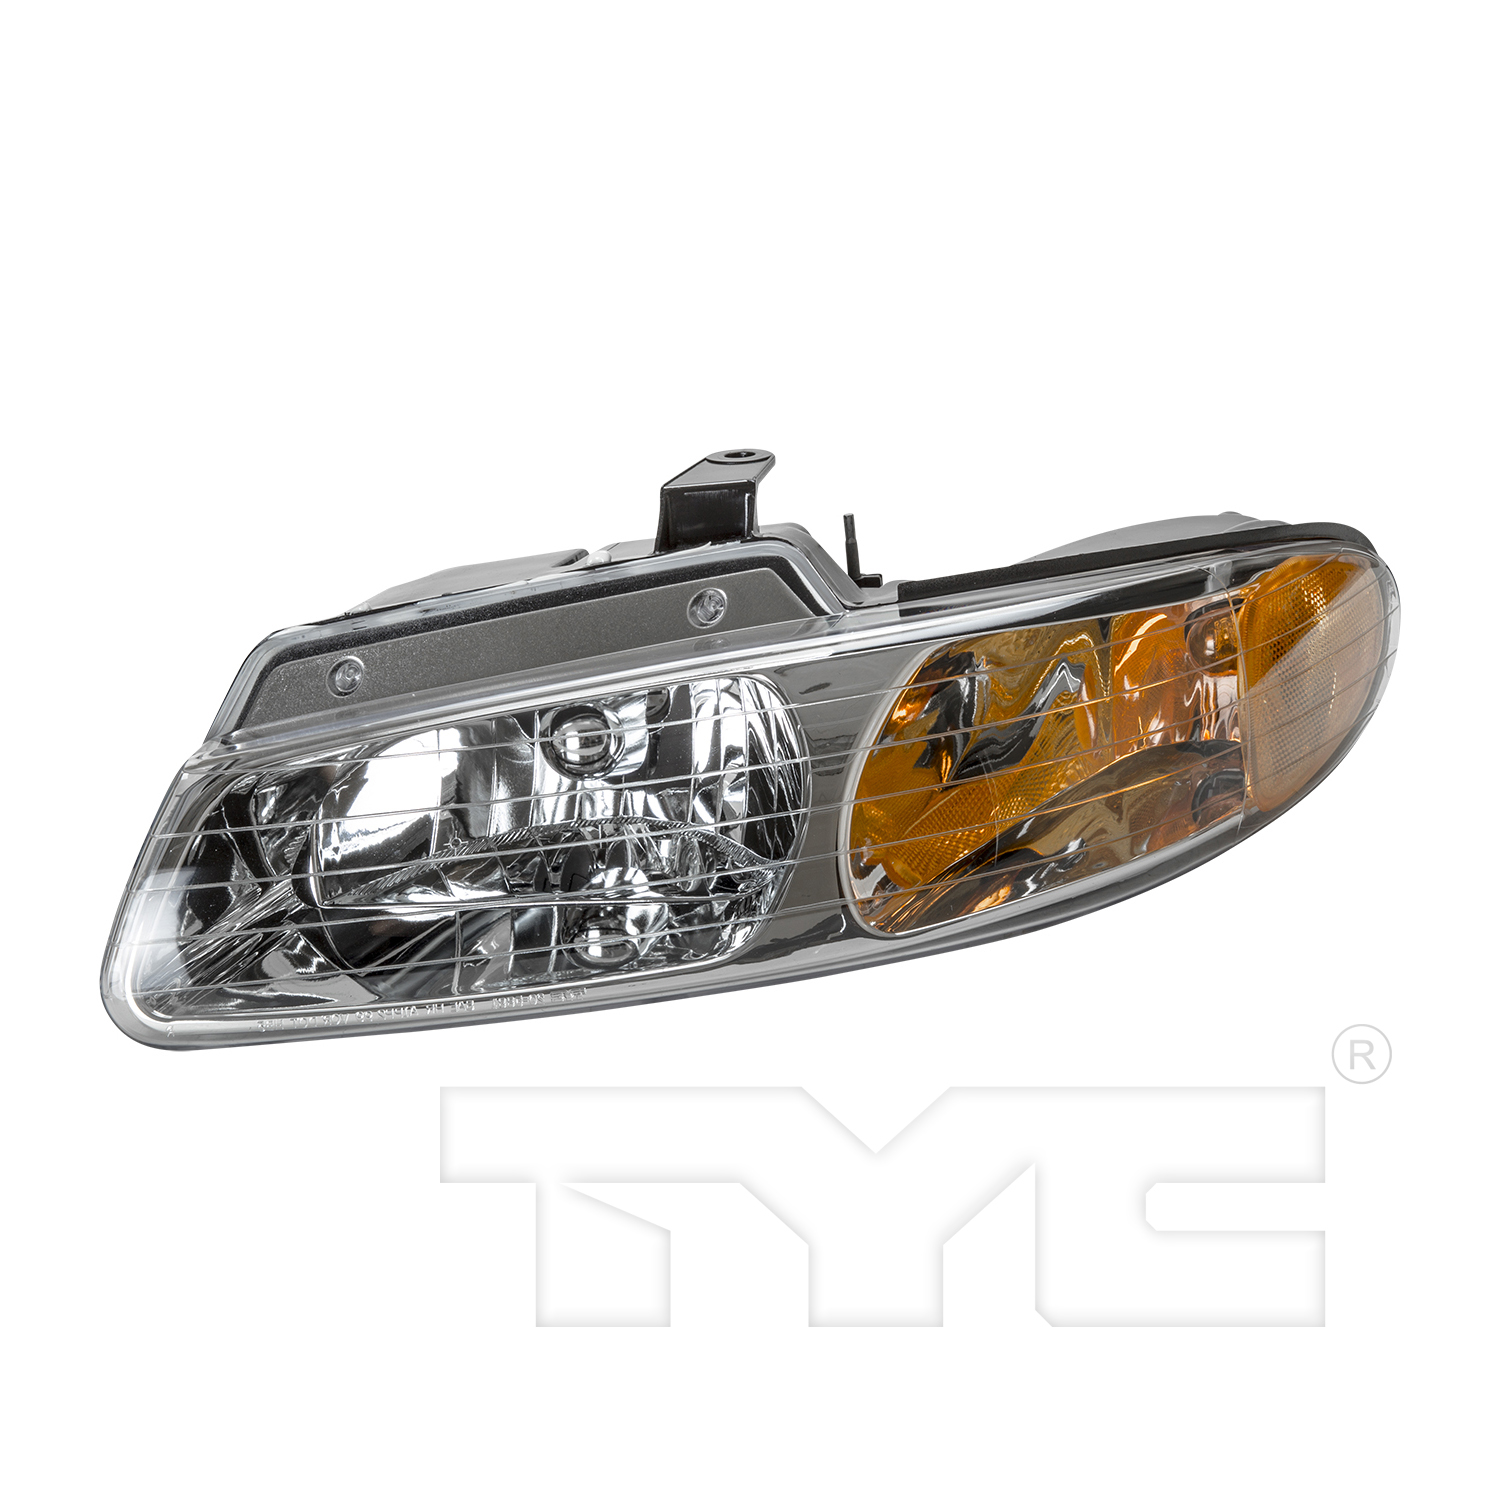 Aftermarket HEADLIGHTS for PLYMOUTH - VOYAGER, VOYAGER,00-00,LT Headlamp assy composite